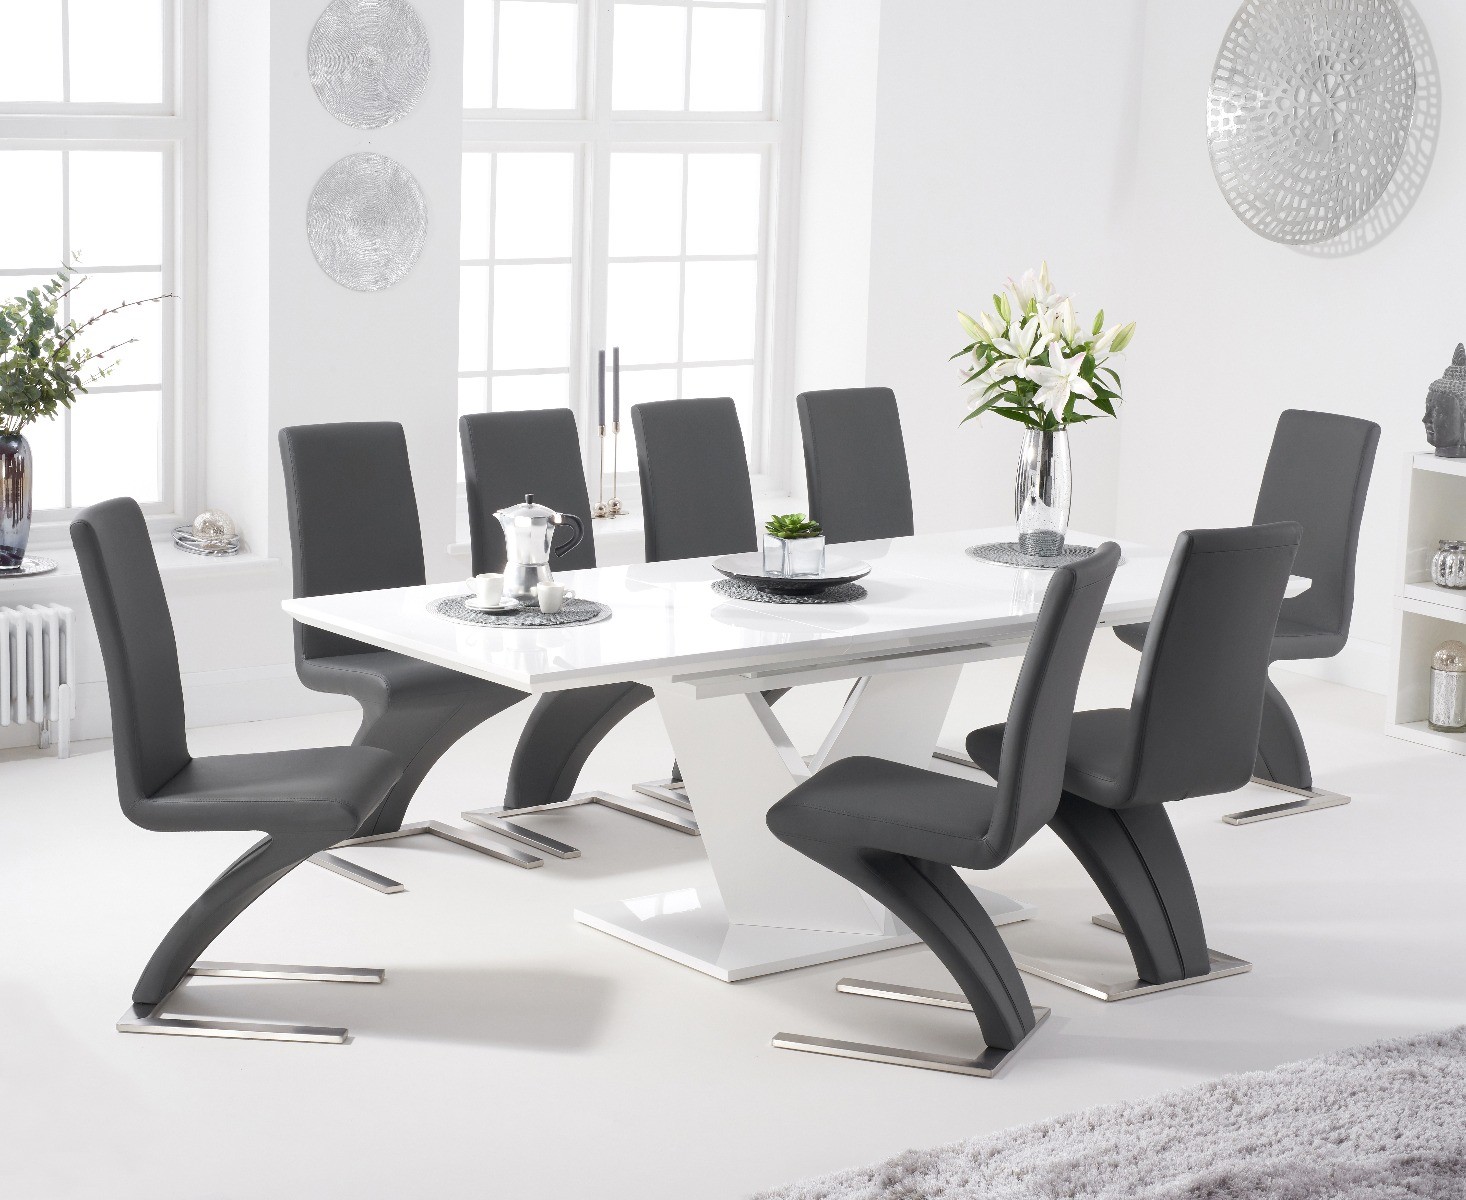 Extending Vittorio 160cm White High Gloss Dining Table With 8 Grey Aldo Faux Leather Chairs